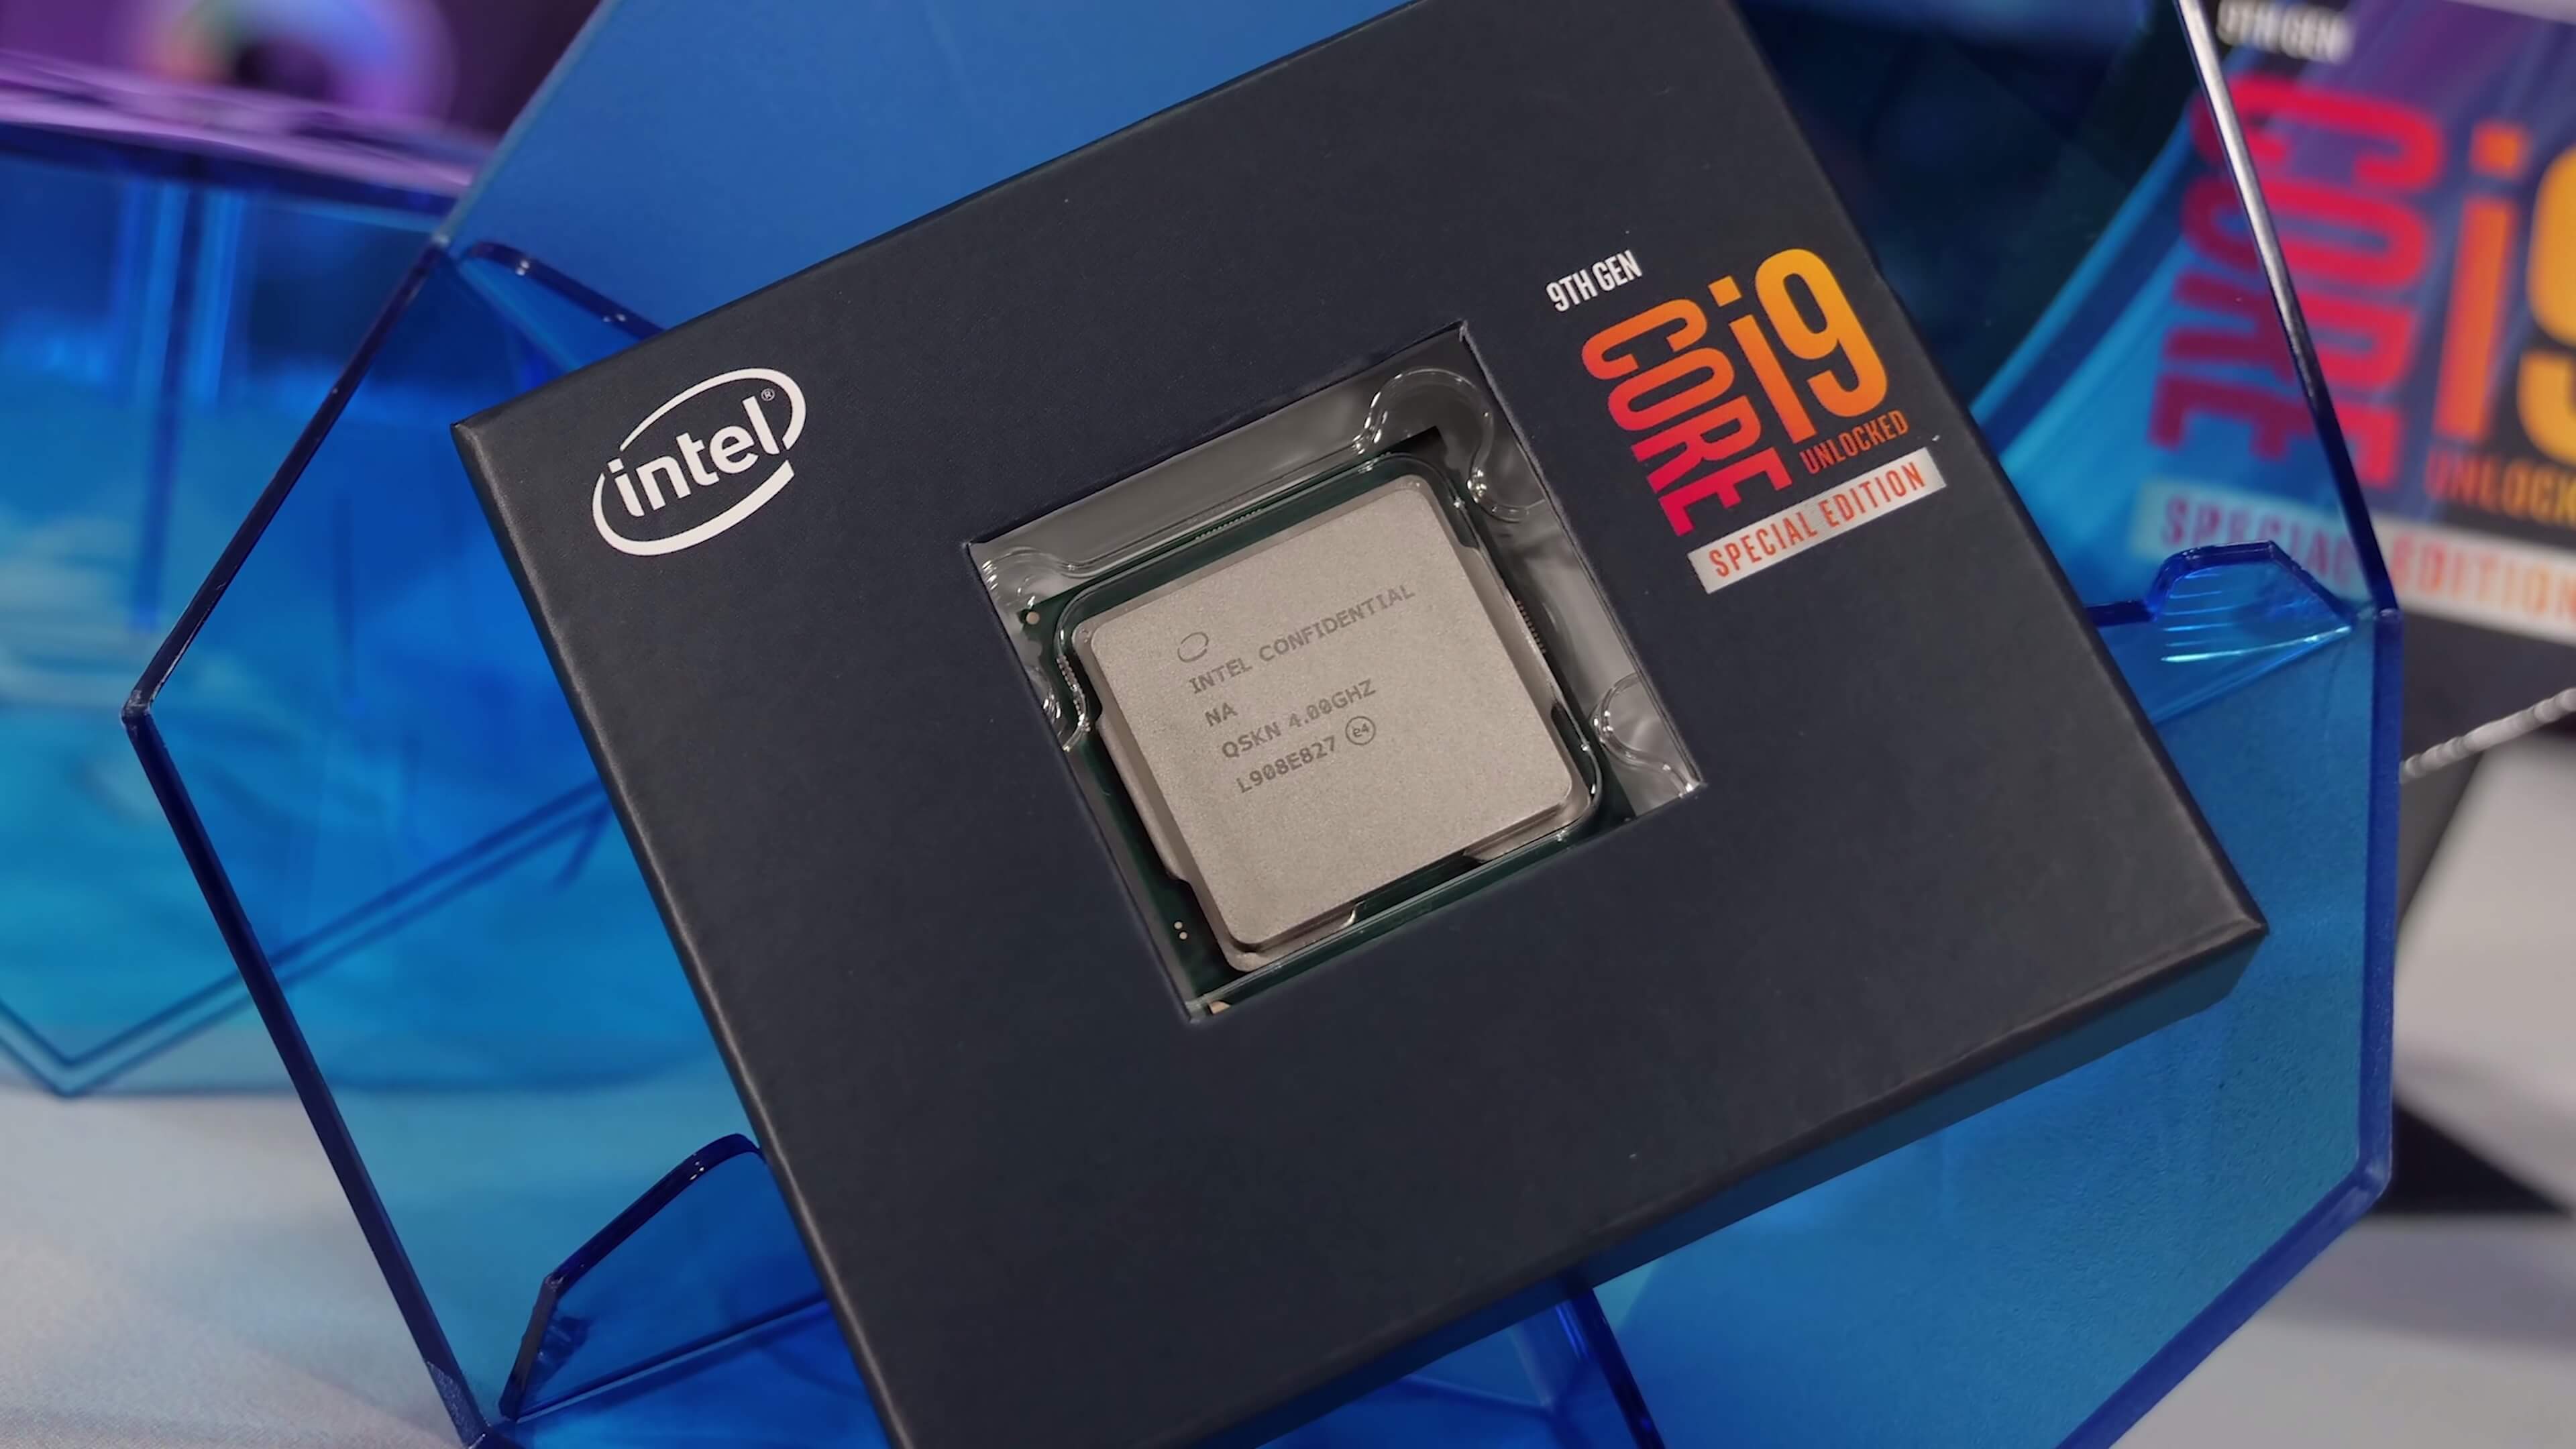 Slides reveal Intel's entire 10th-gen series: Up to 5.3 GHz and 10 cores